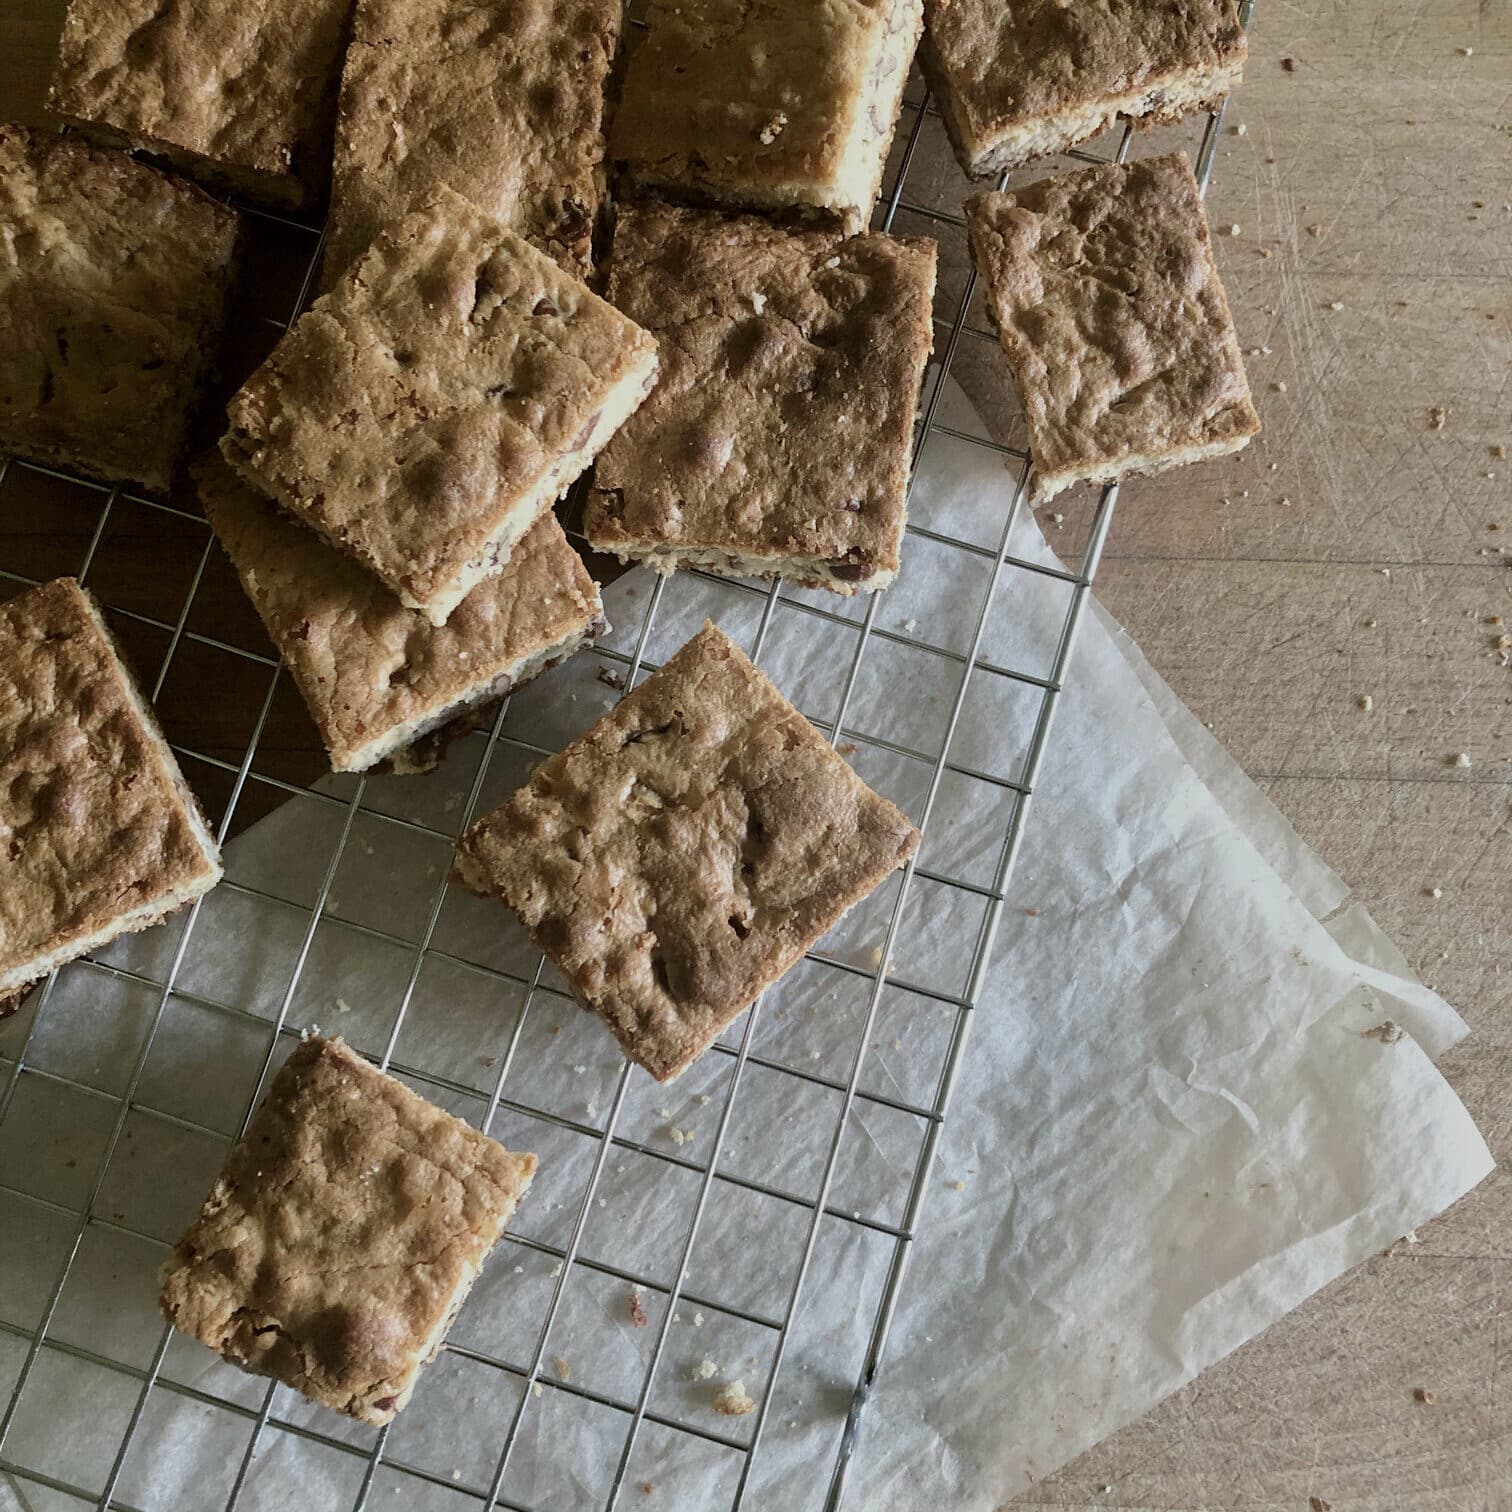 Mindful Baking: Sweet Treats for Reflection and Sharing